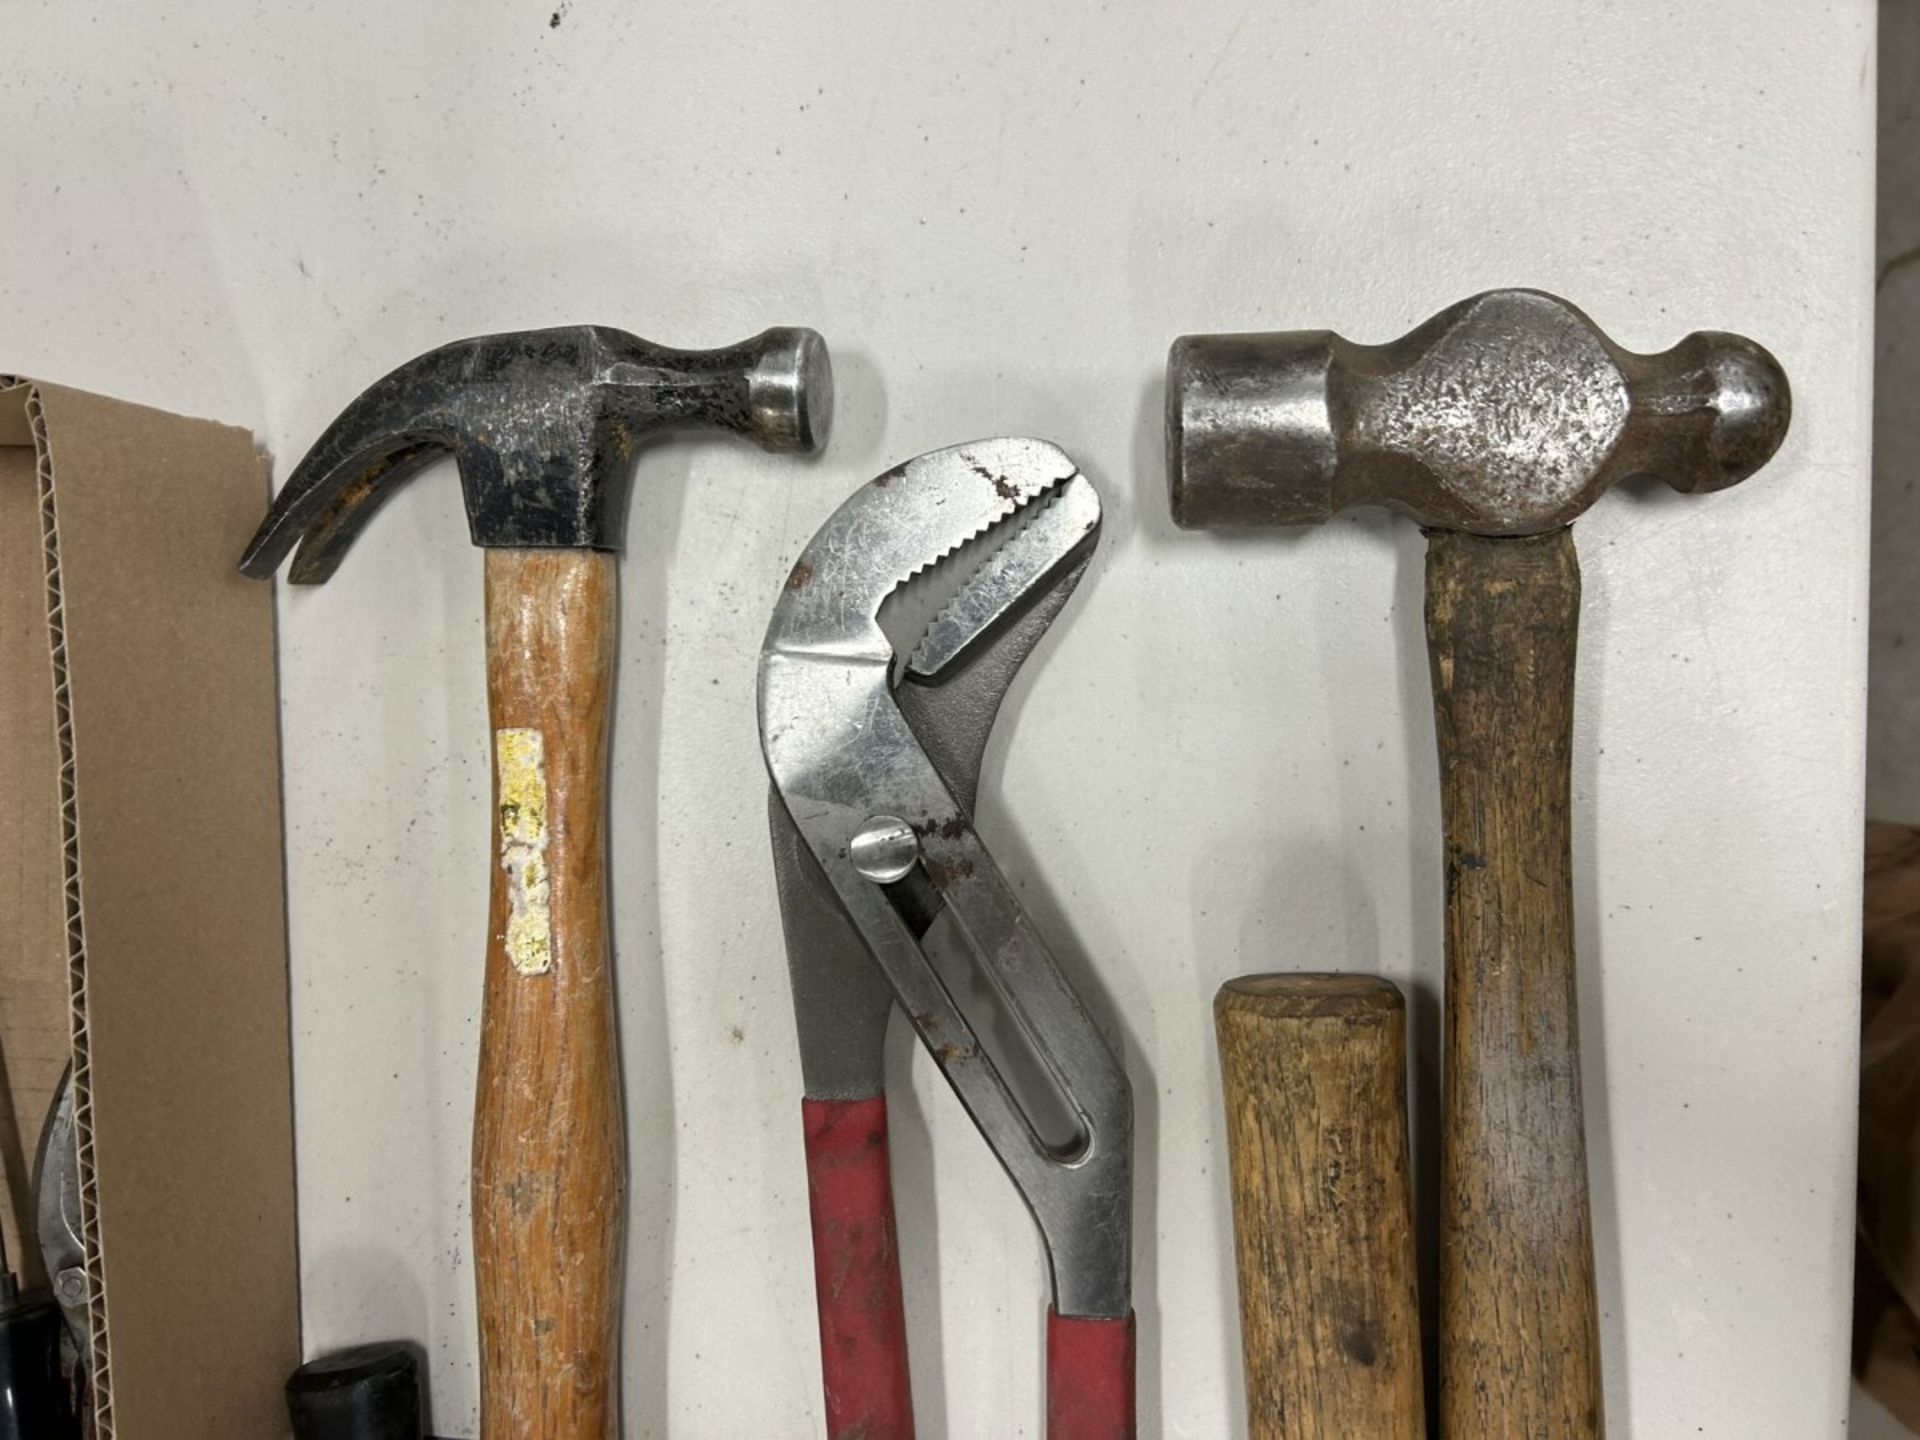 L/O ASSORTED HAND TOOLS -RUBBER MALLET, HAMMERS ,VICE GRIPS, PRY BARS, ETC. - Image 2 of 5